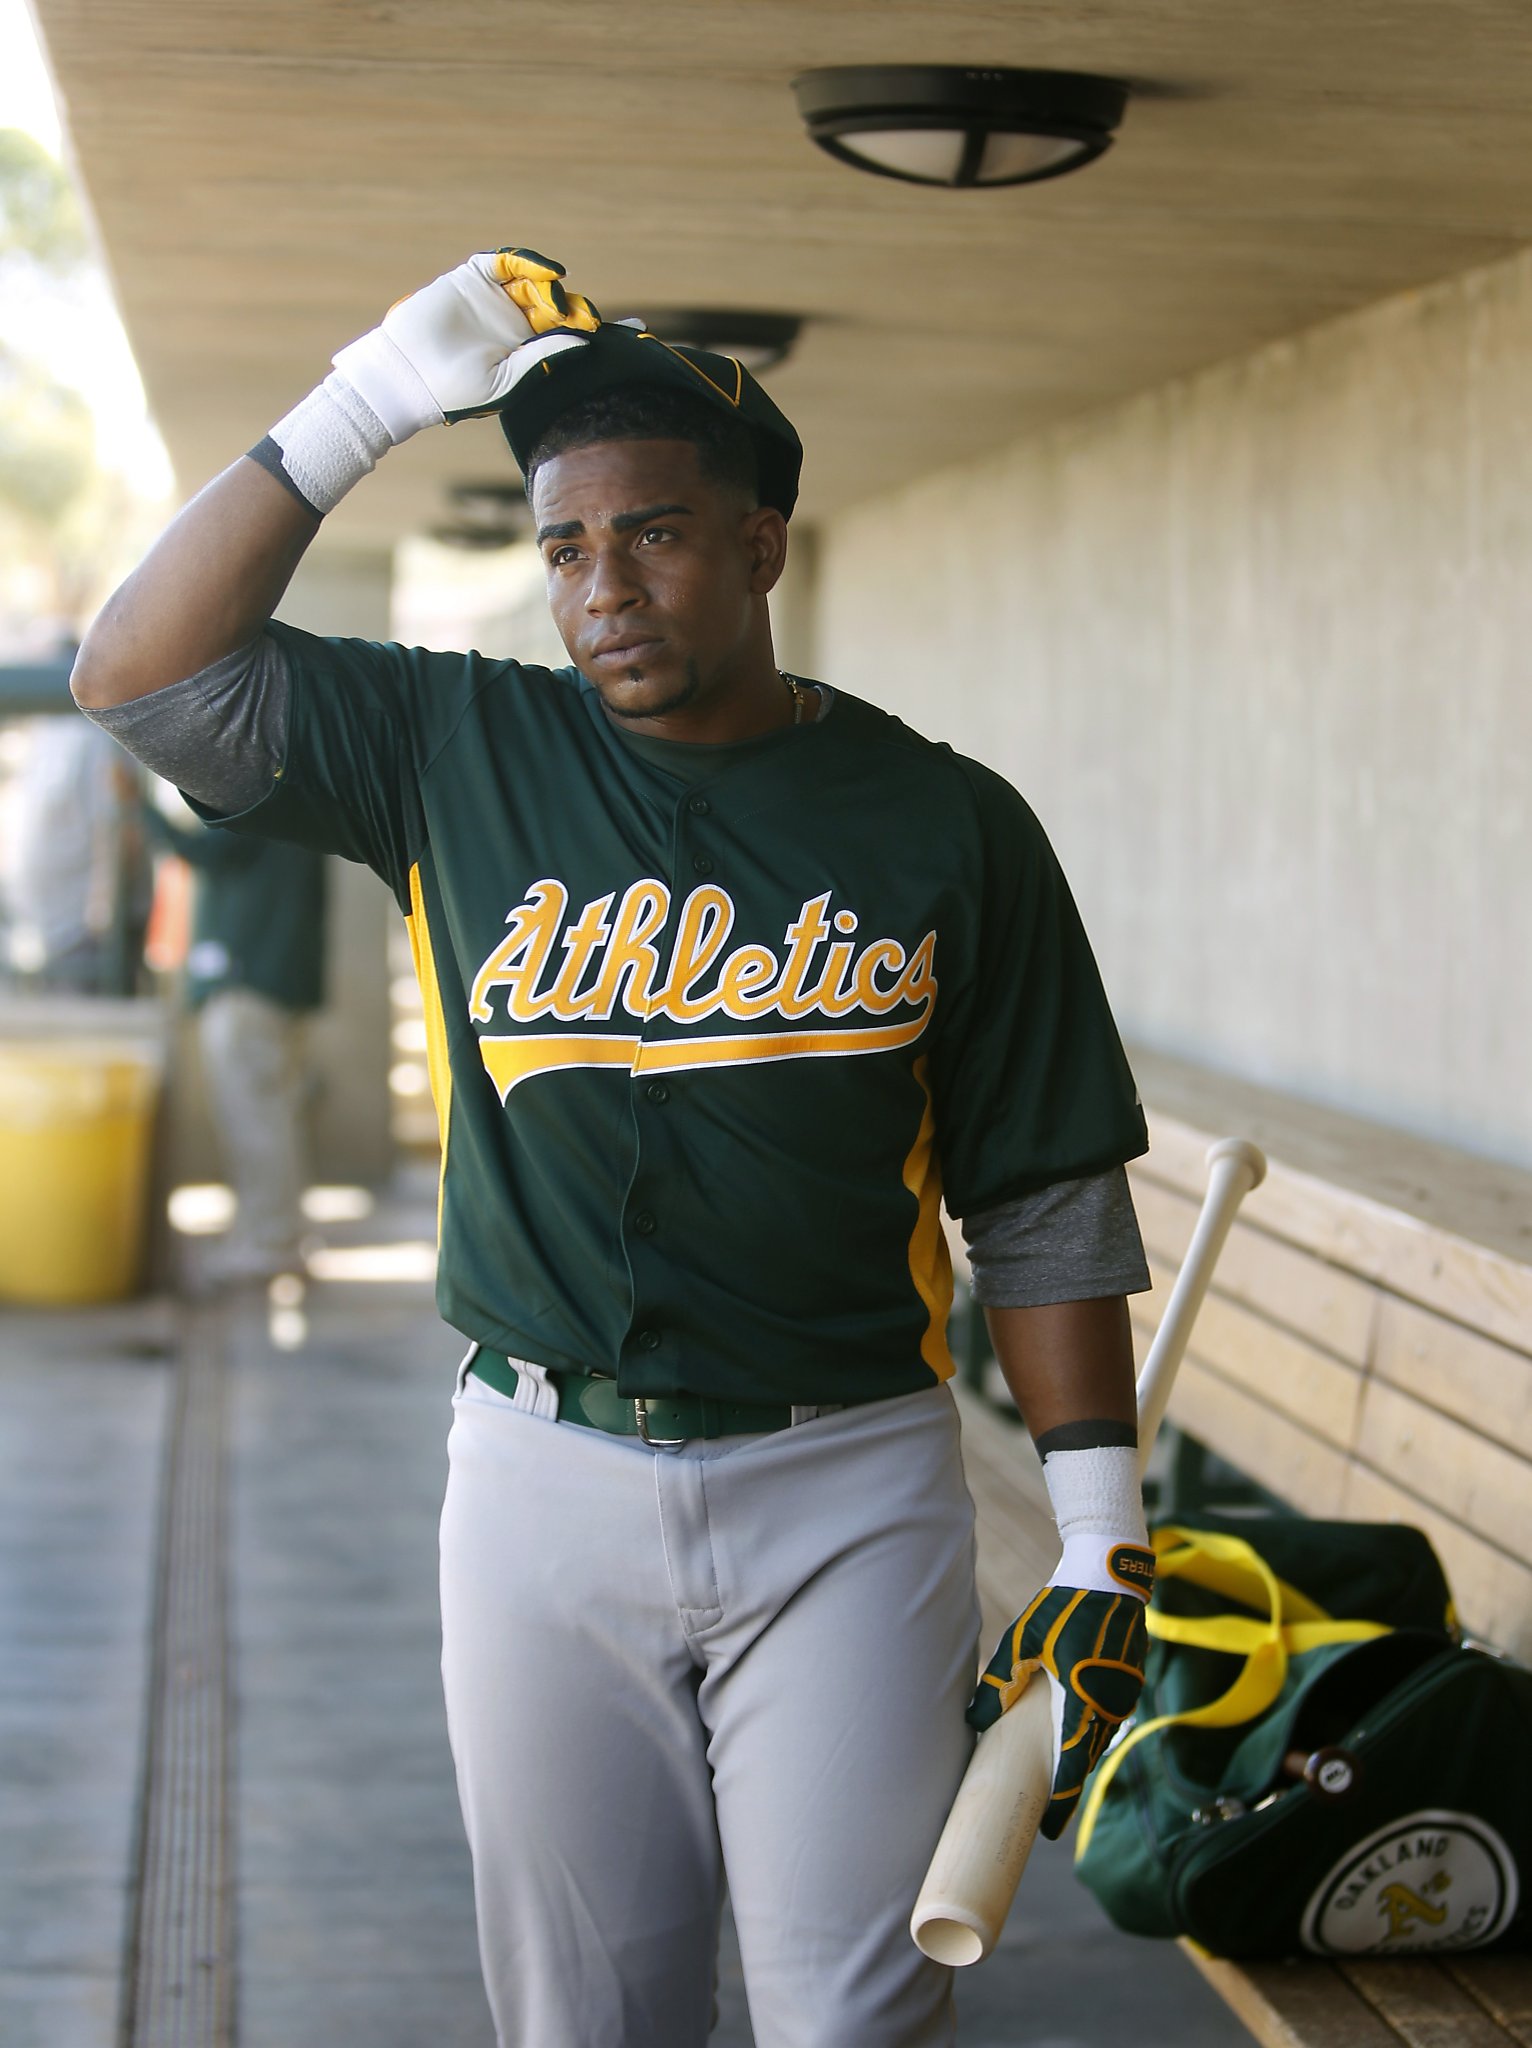 Yoenis Cespedes says he'd like to finish his career in Oakland